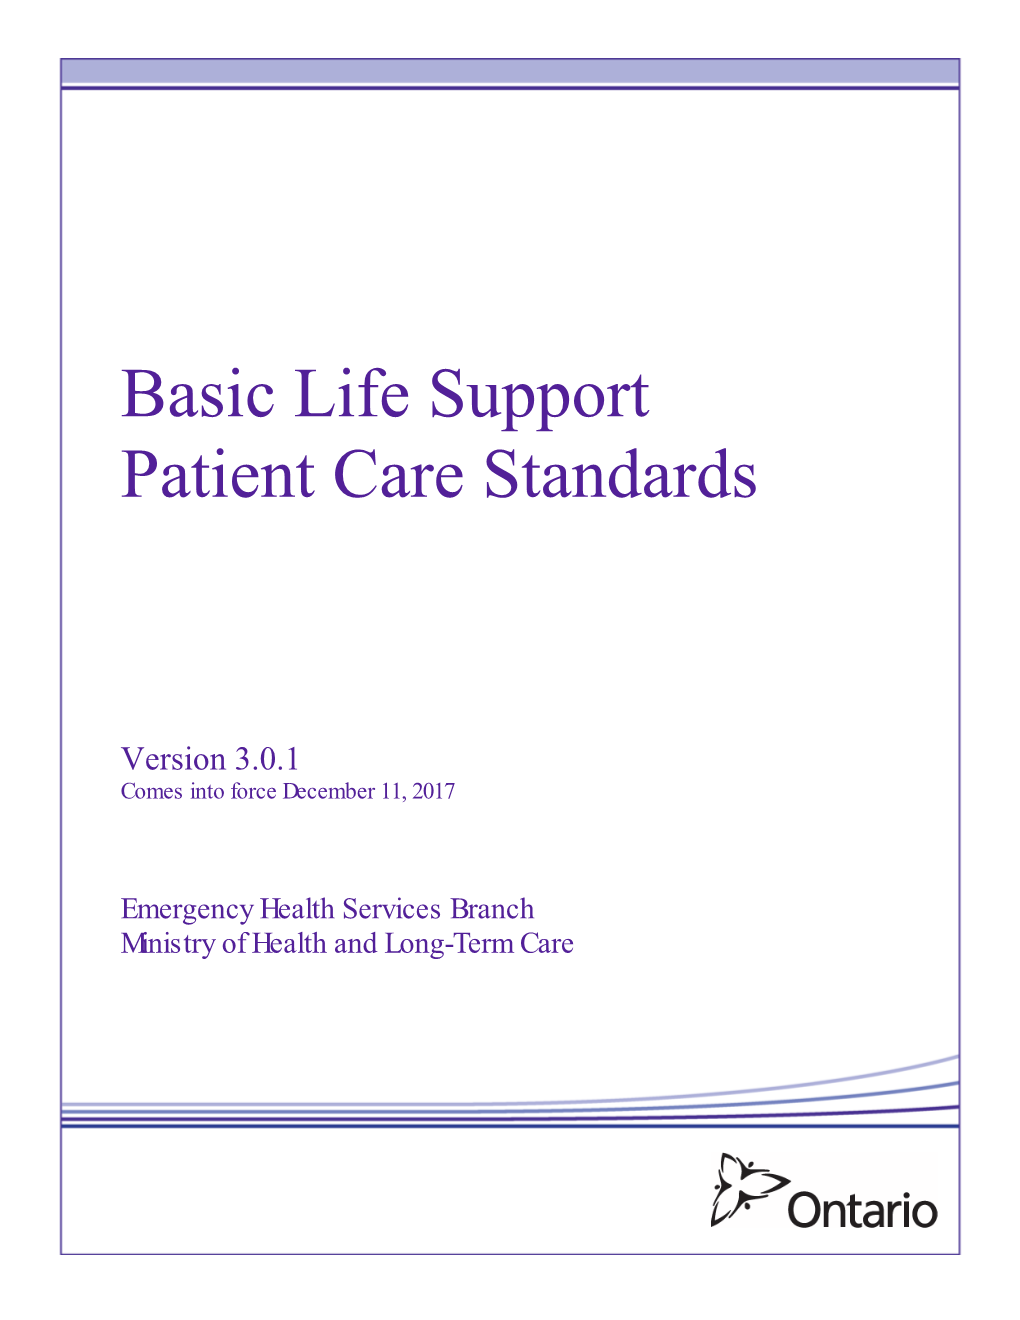 Basic Life Support Patient Care Standards – Version 3.0.1 1 Preamble Emergency Health Services Branch, Ontario Ministry of Health and Long-Term Care